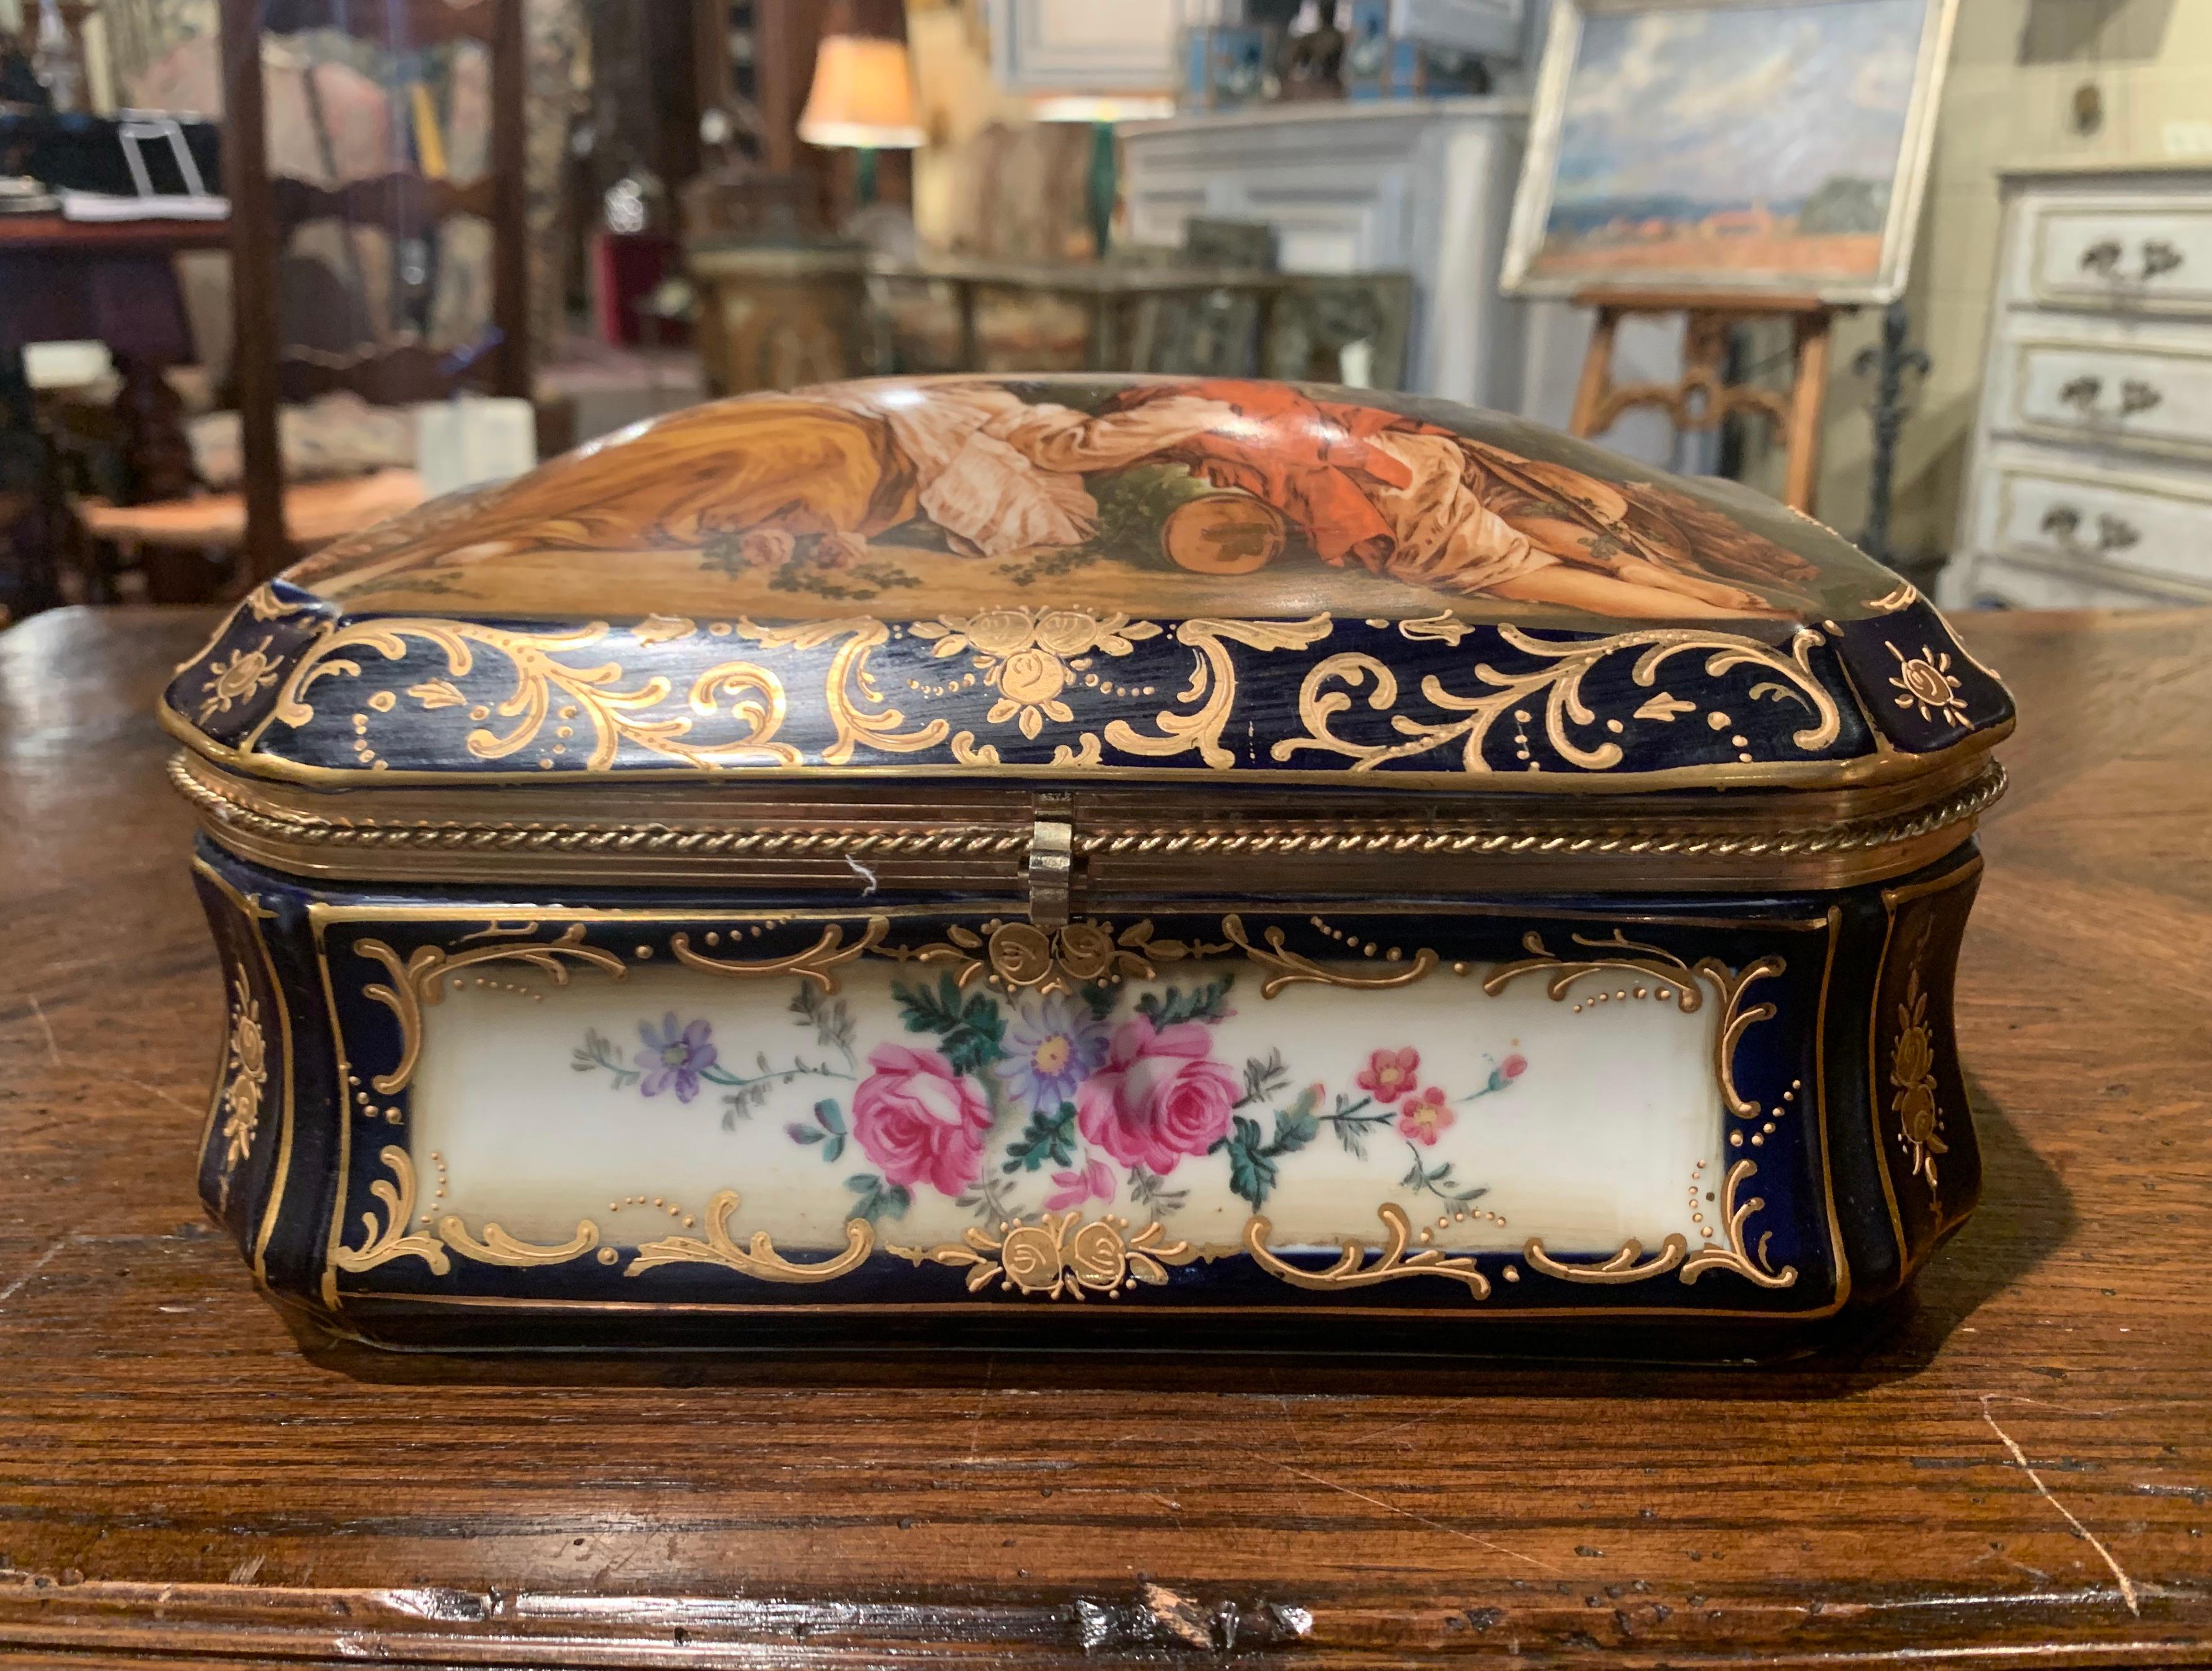 Decorate a master bathroom or powder room with this colorful antique jewelry box; crafted in the style of Sevres, France circa 1870, the porcelain bombe casket with cobalt blue and gilt border, features a hand painted pastoral scene after Francois